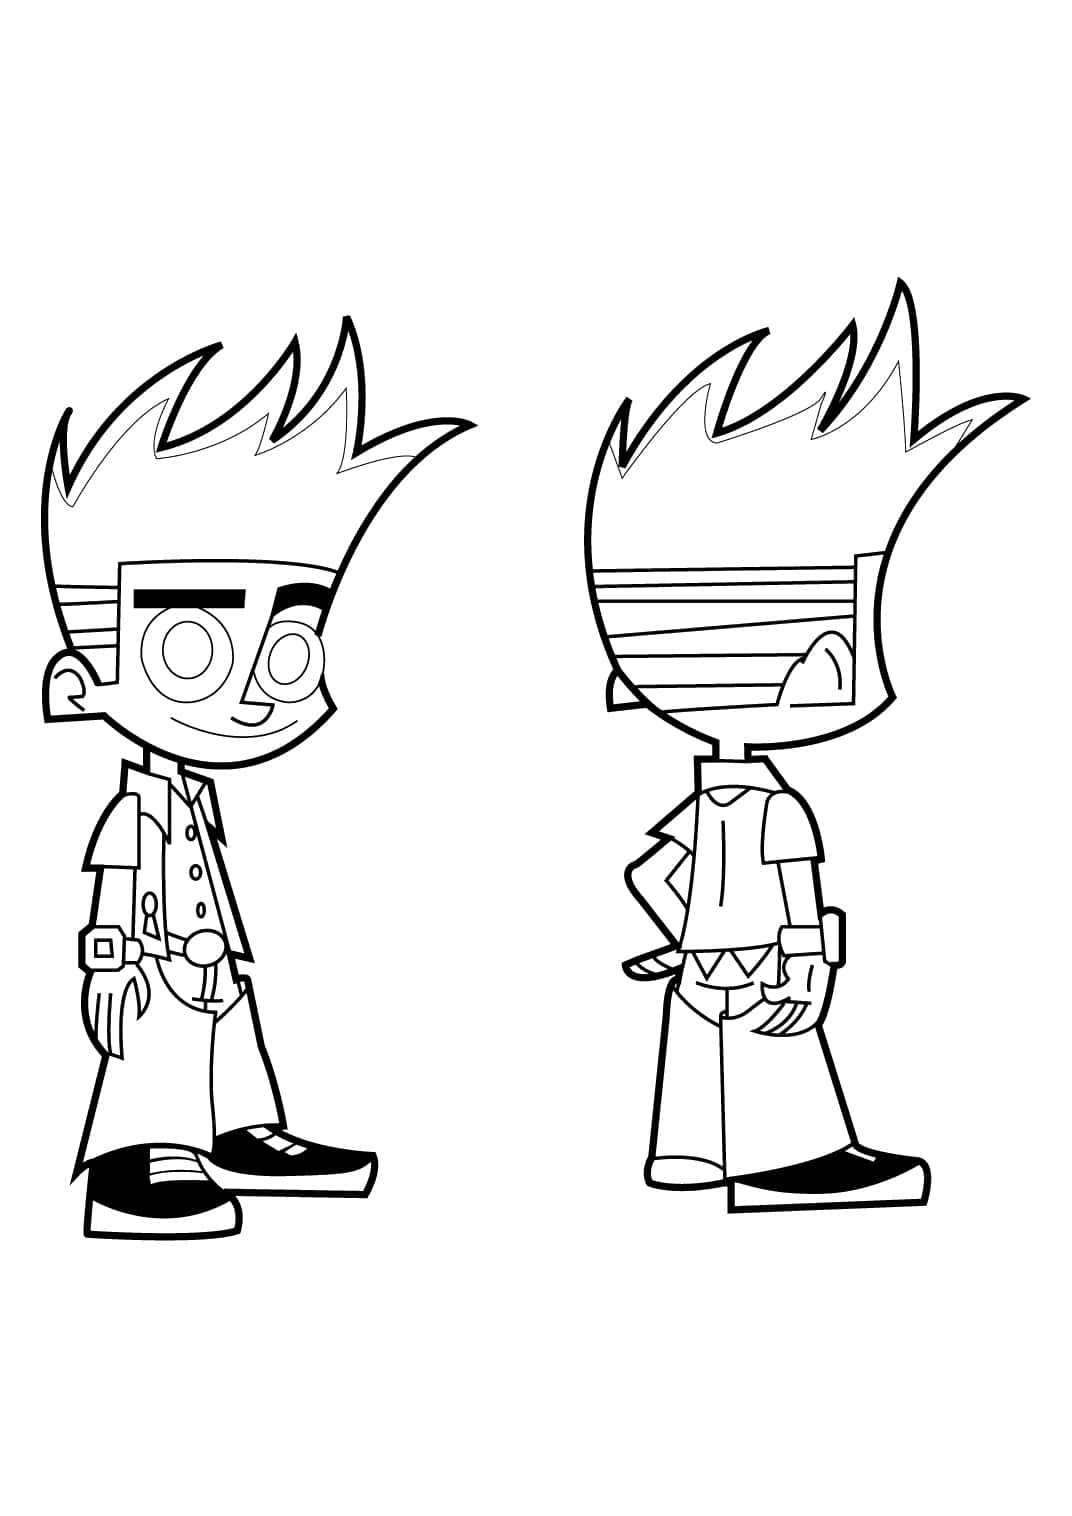 [100+] Johnny Test Wallpapers | Wallpapers.com